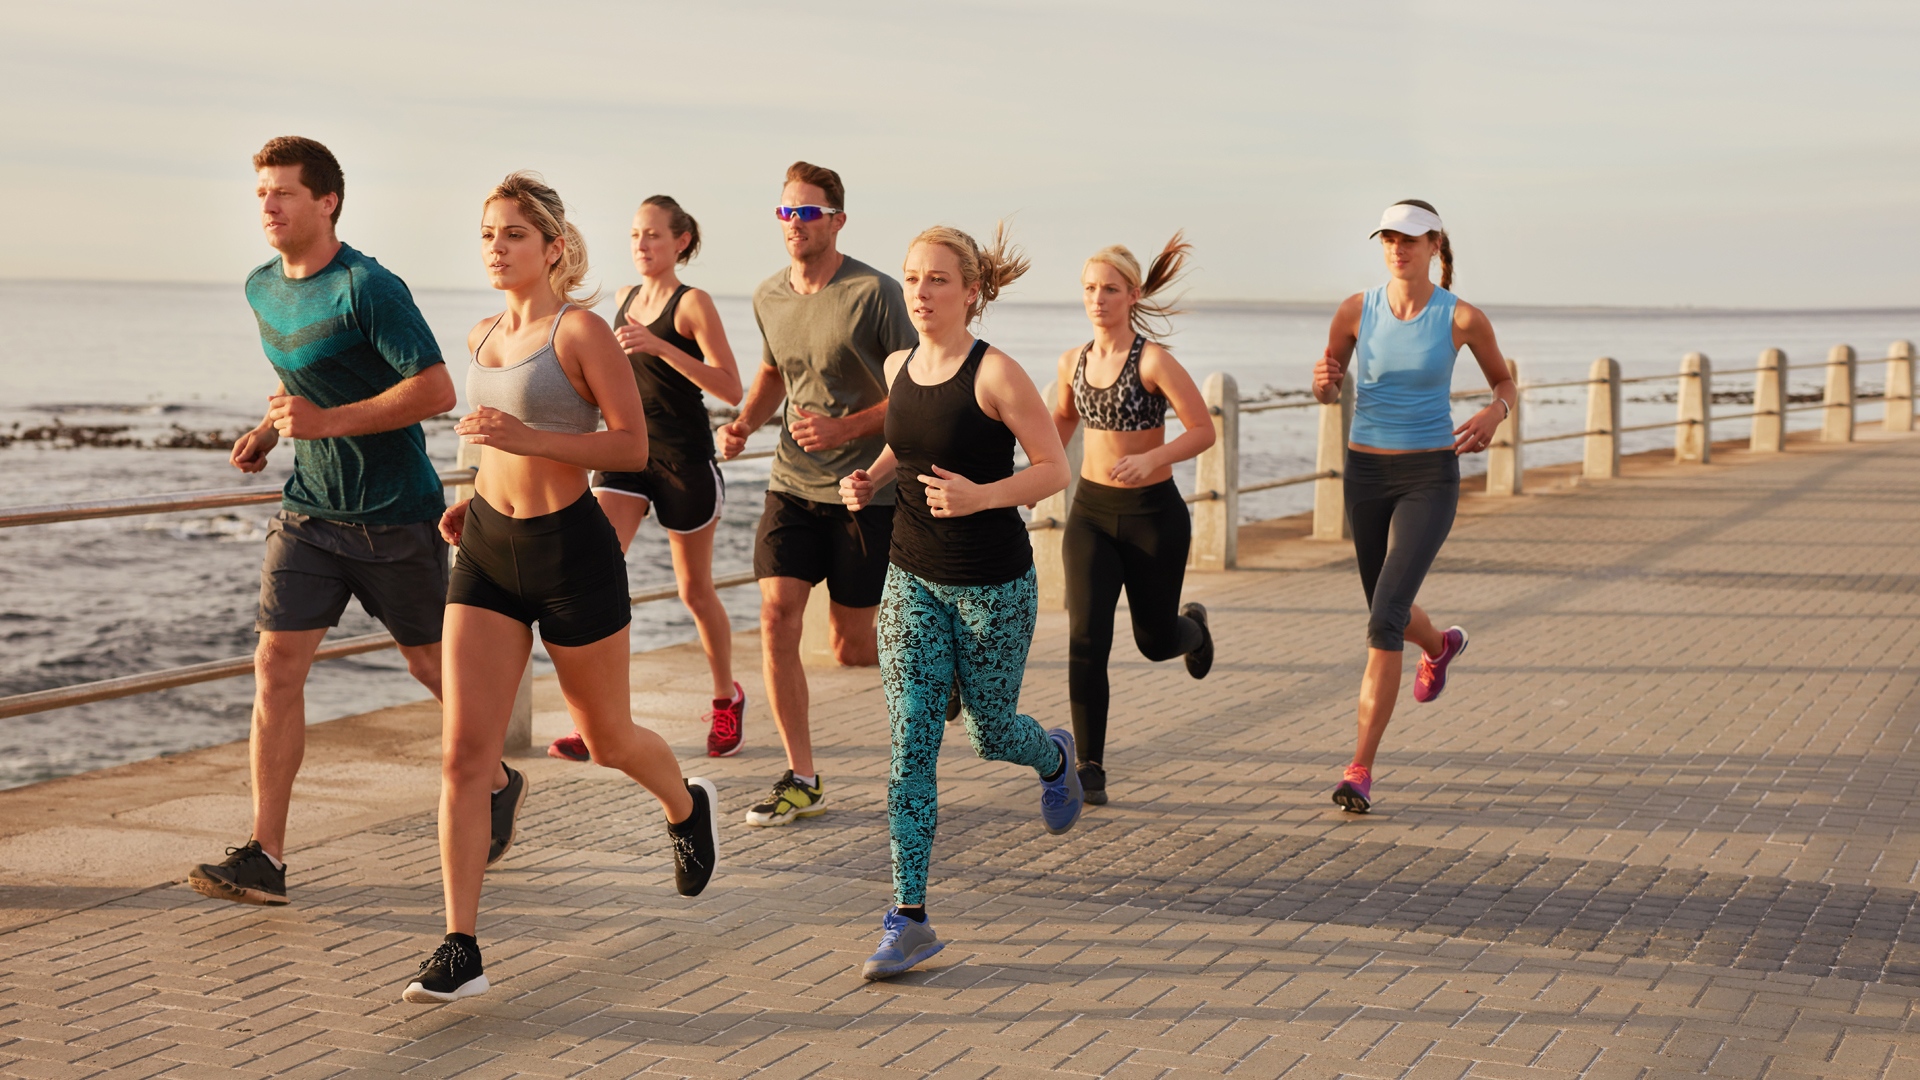 Portrait of young people running along the beach boardwalk by the ocean. Fit young men and women running training outdoors by the seaside.